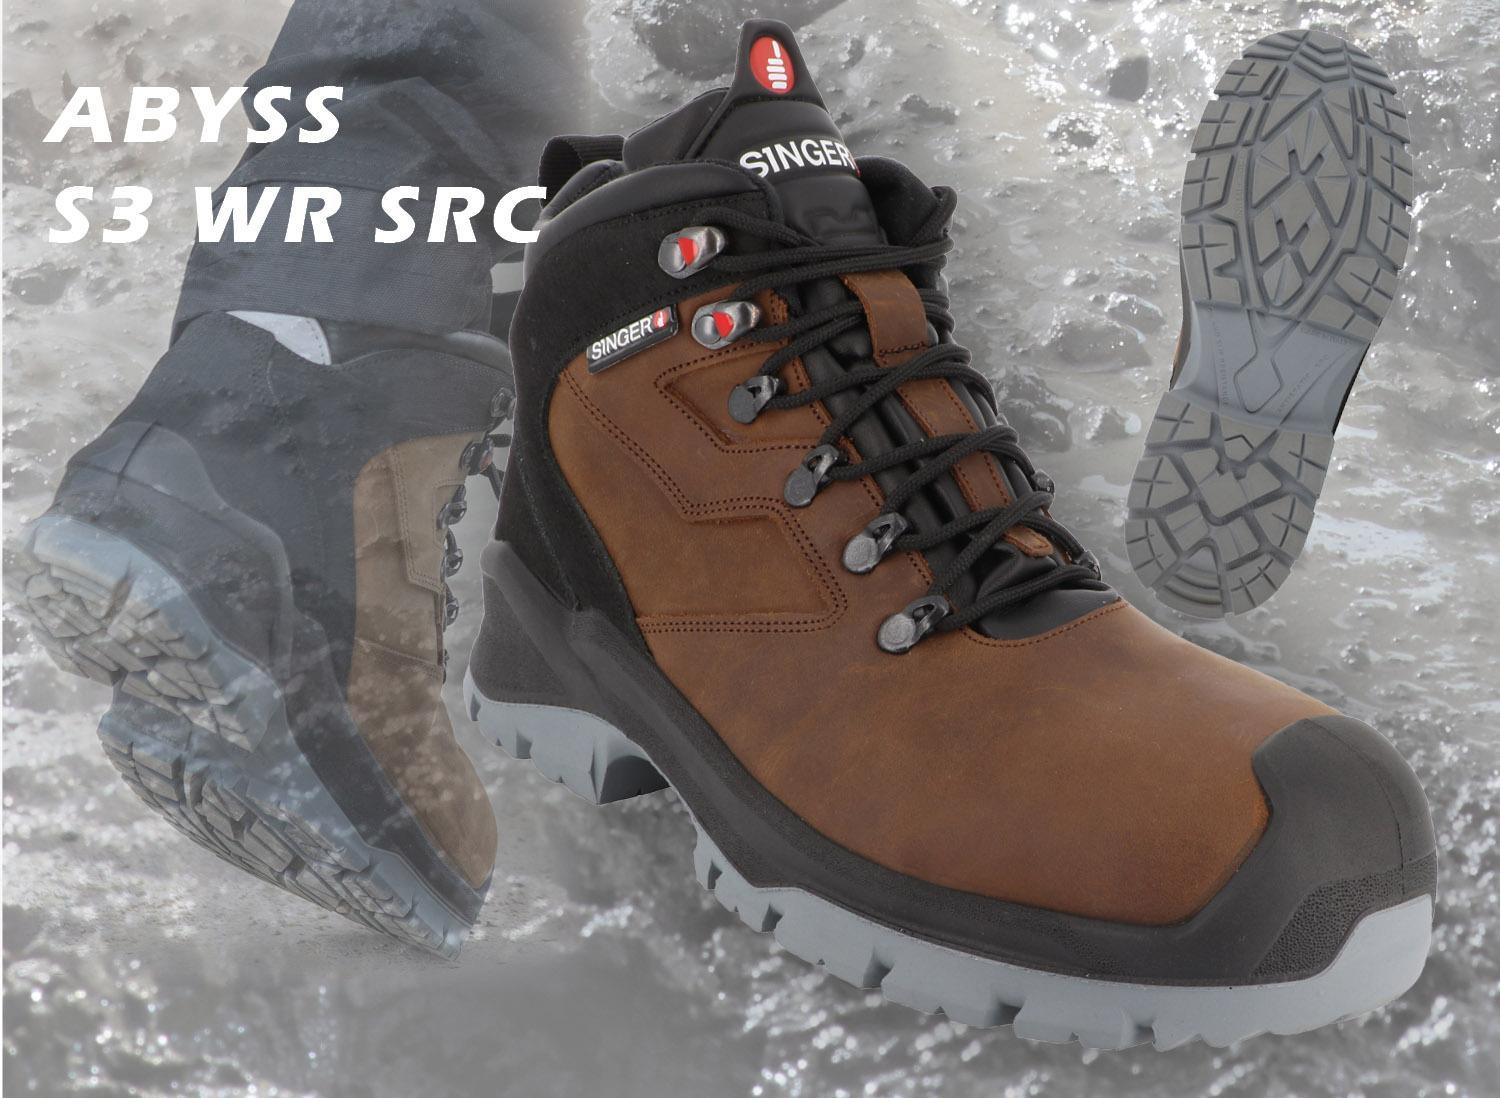 CHAUSSURE ABYSS S3 WR SRC